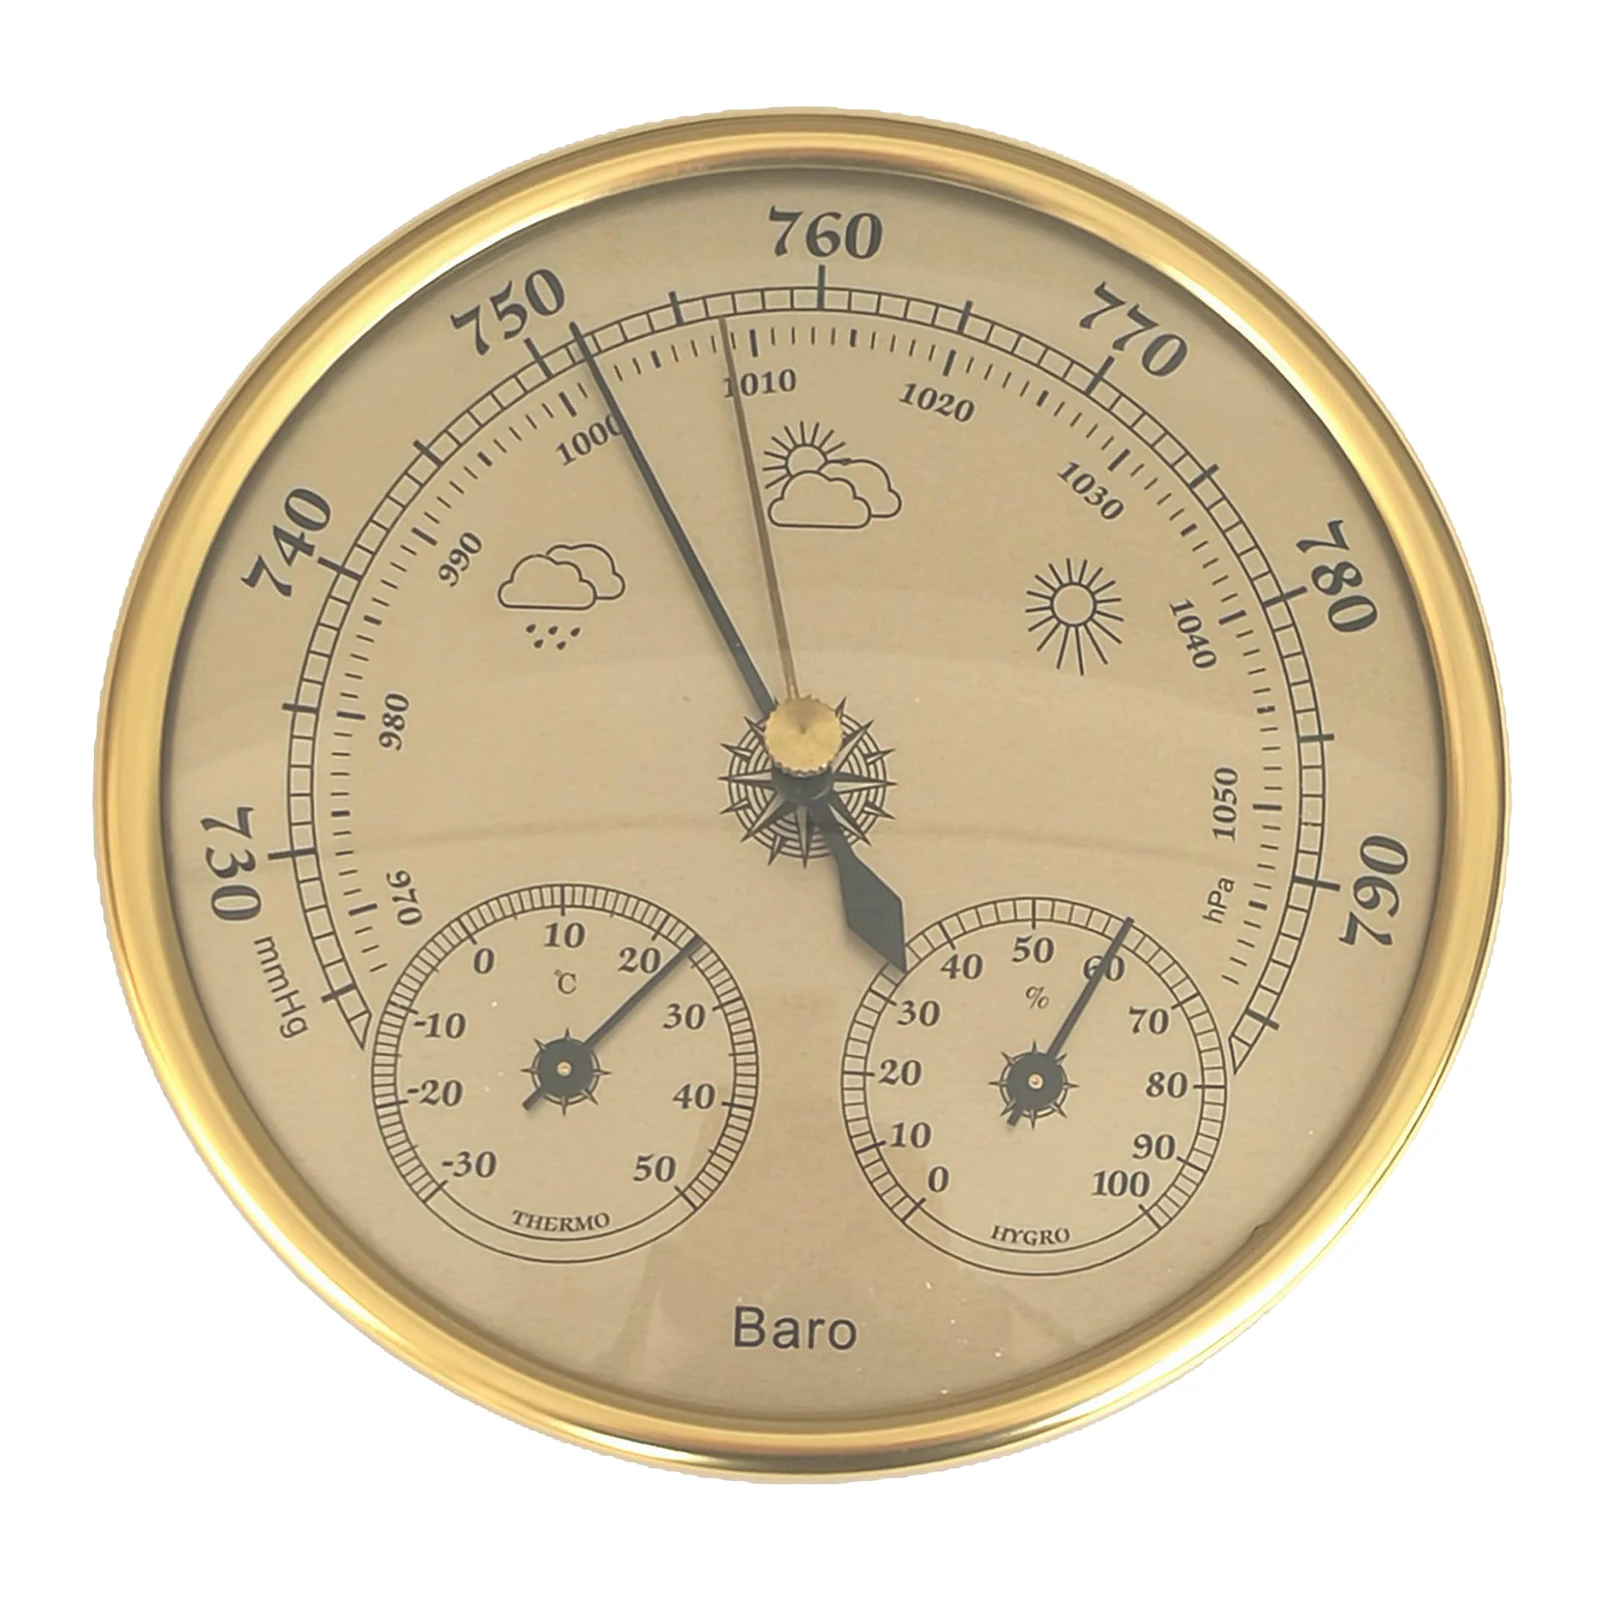 

2Pcs 3 in 1 Weather Station for Indoor and Outdoor use, Diameter 13 cm, Barometer Thermometer Hygrometer